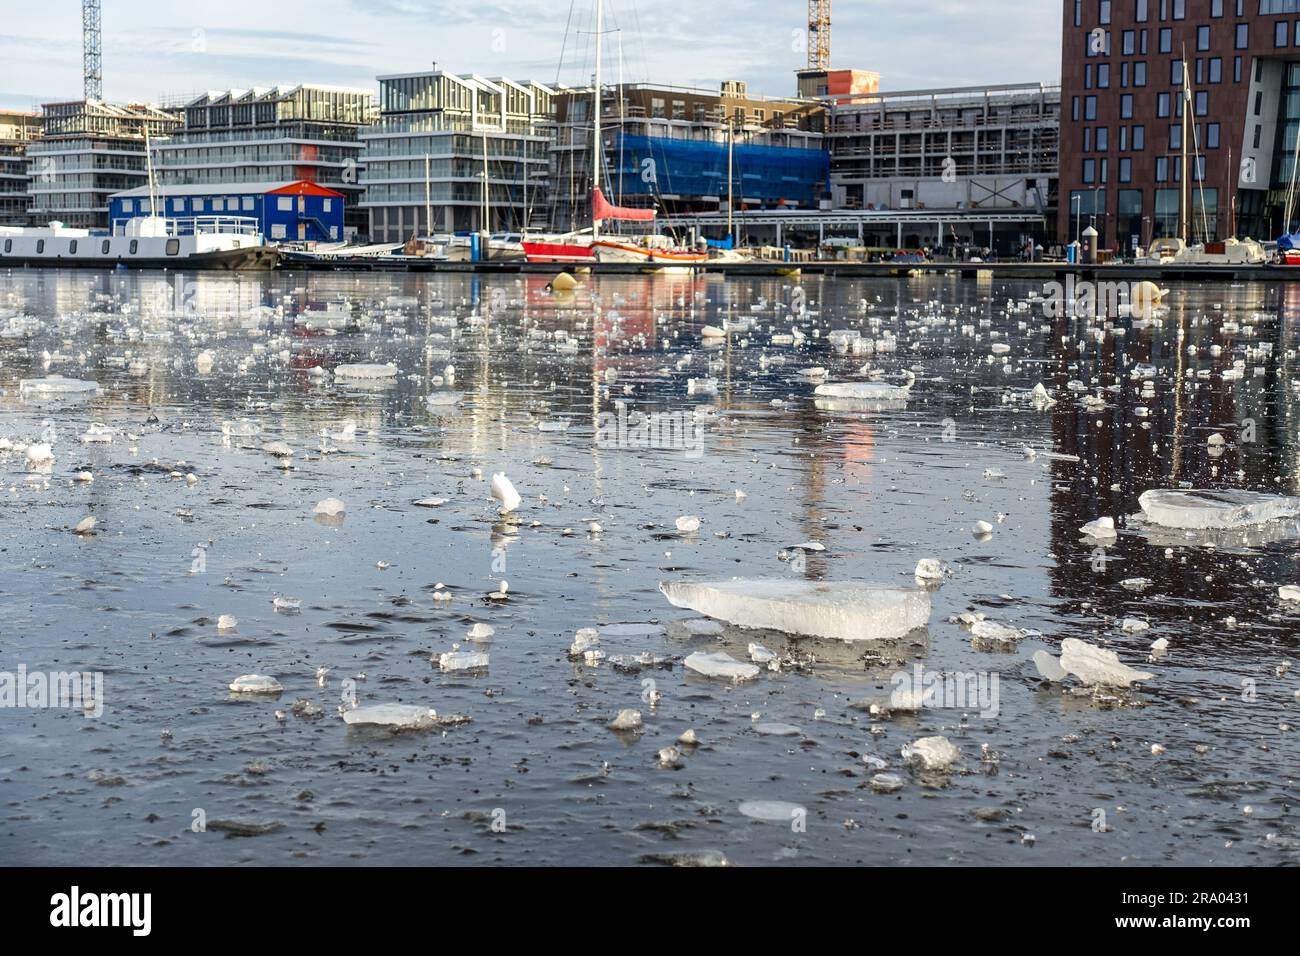 Boats on the frozen canals of Amsterdam during a cold winter day of February 2021 Stock Photo